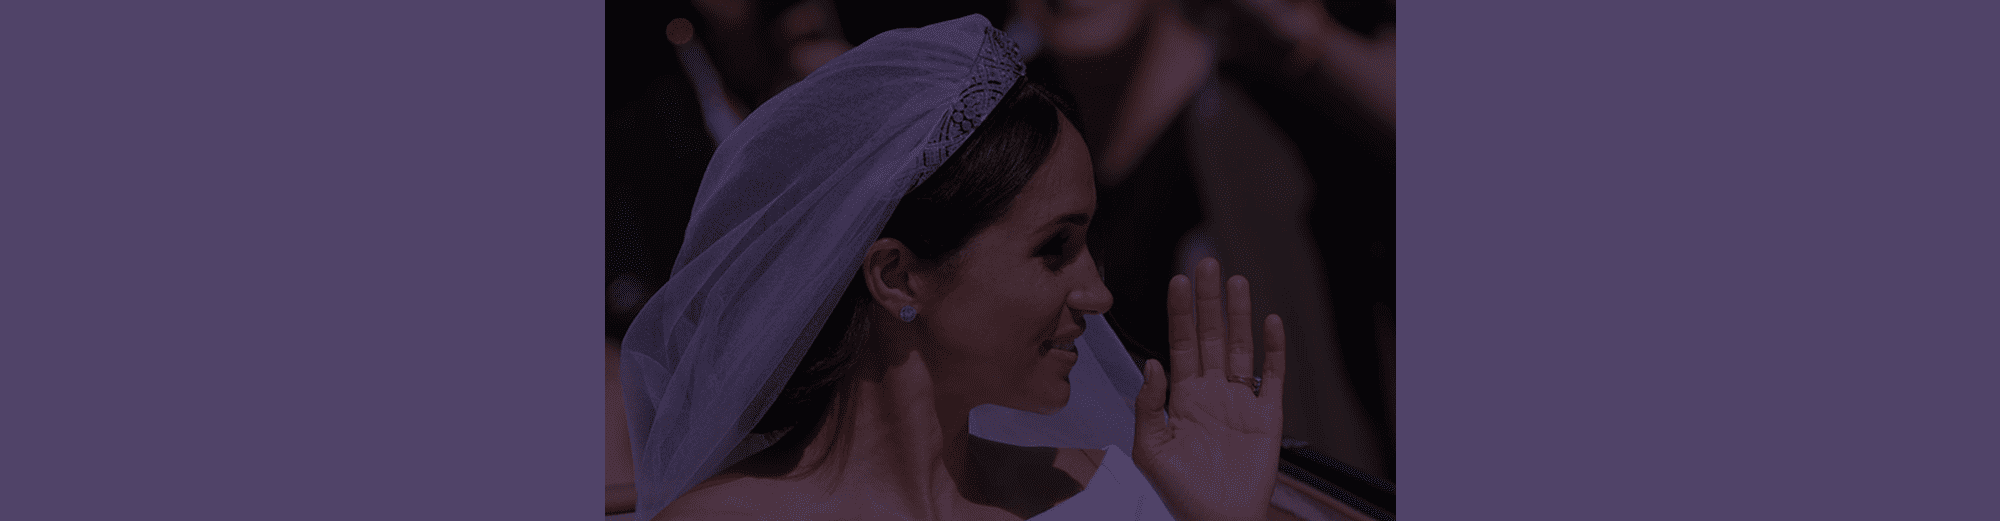 It's official: Prince Harry and Meghan Markle beca